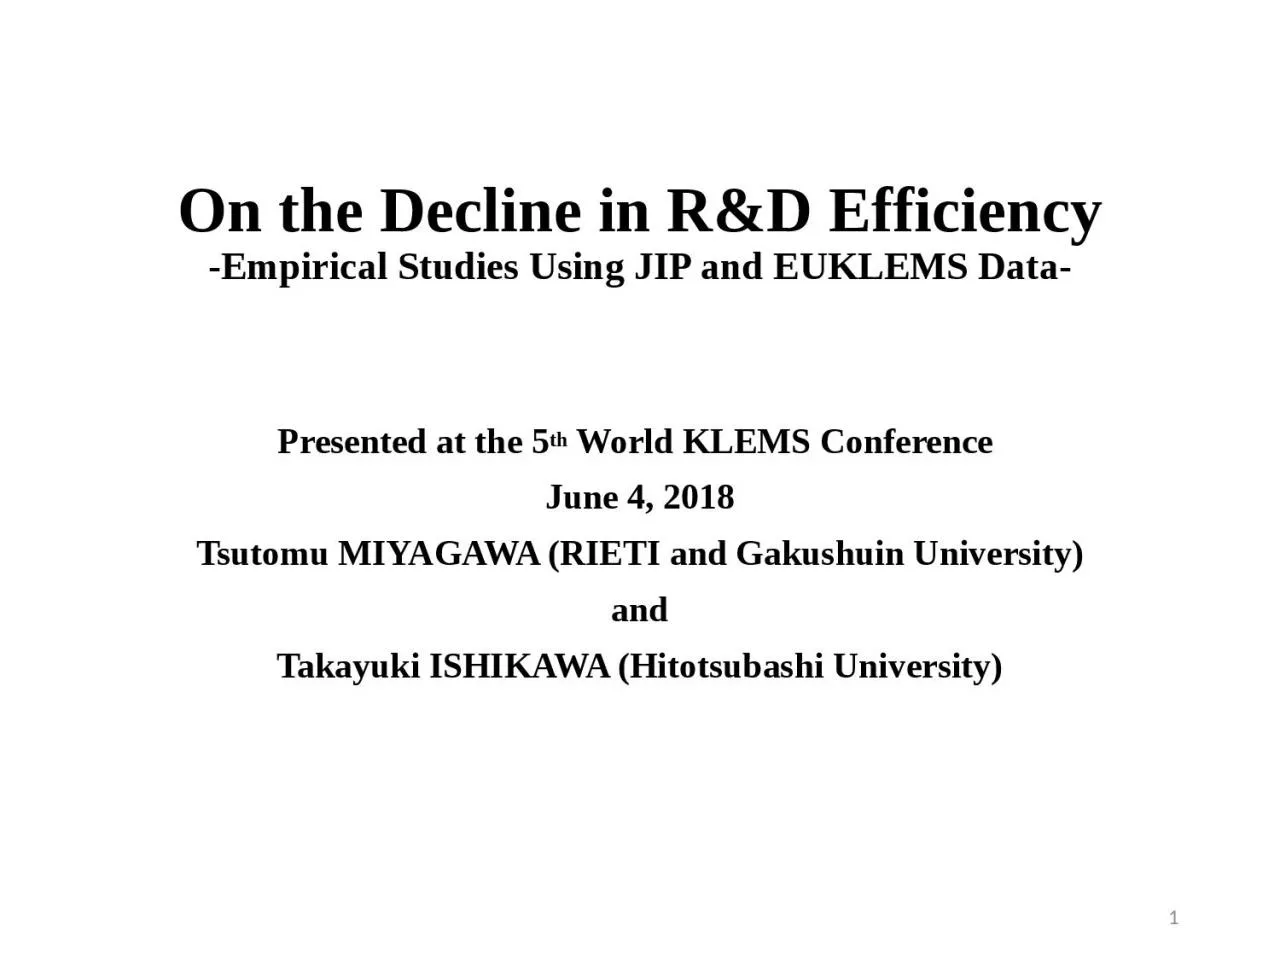 On the Decline in R&D Efficiency